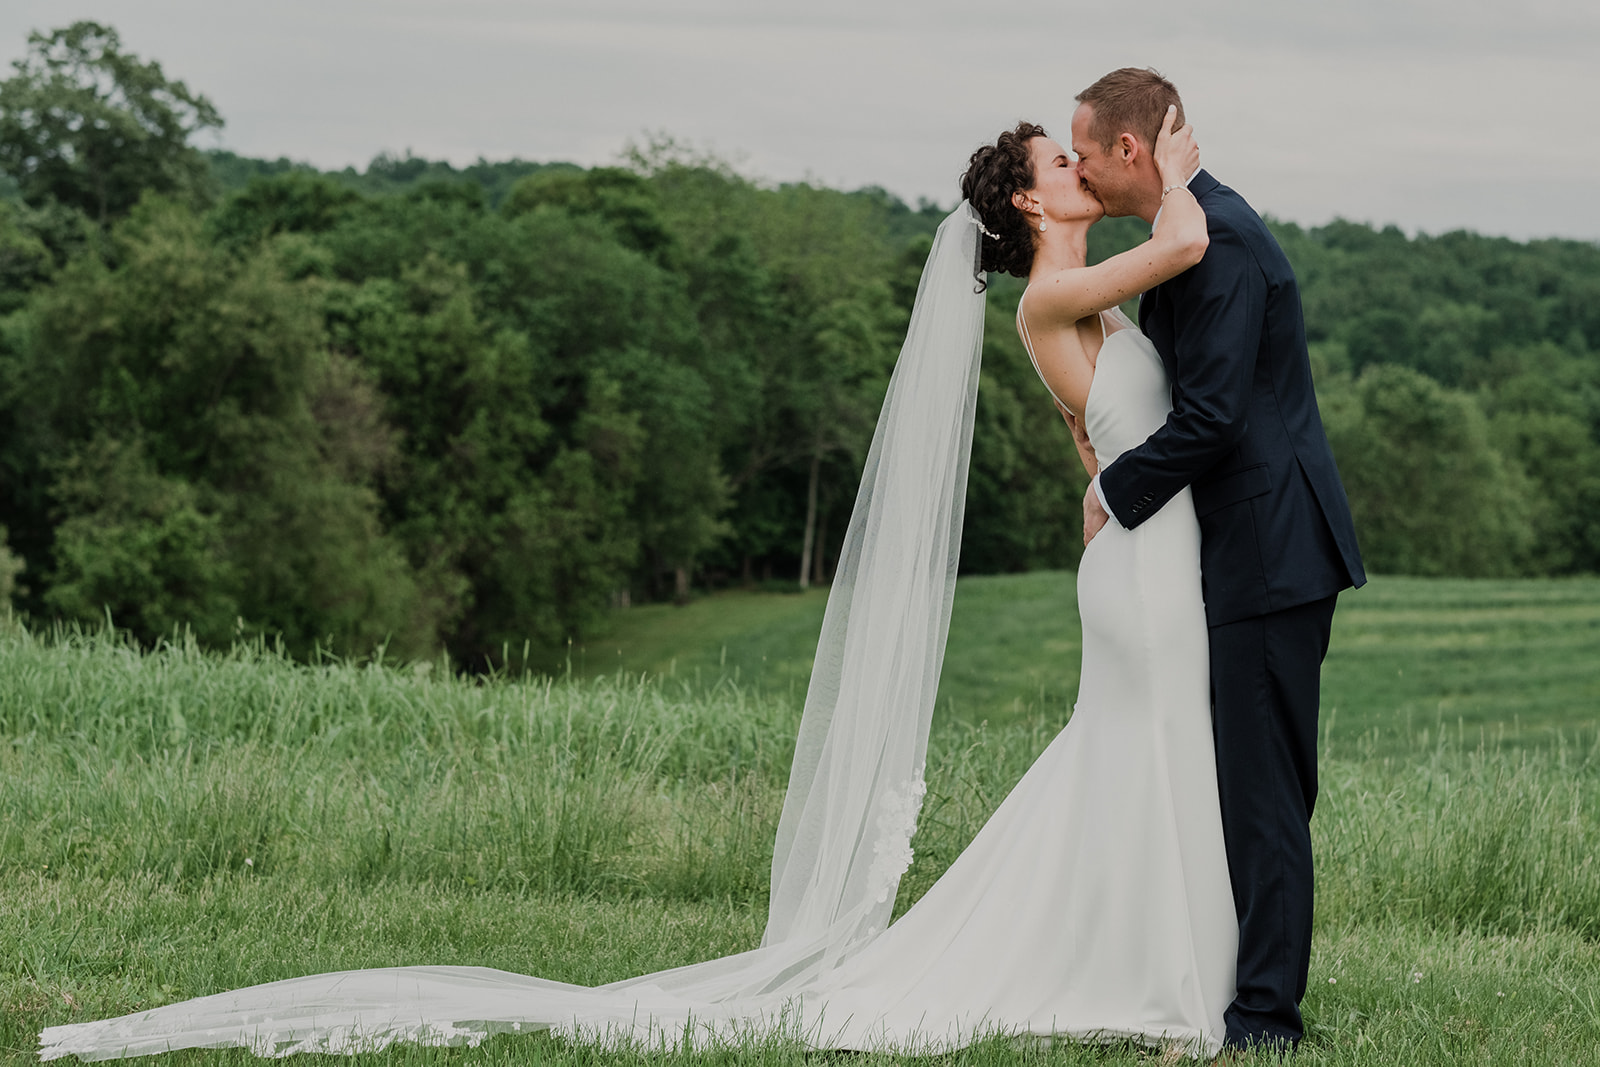 A bride and groom kiss during their first look before their outdoor wedding ceremony at Blue Hill Farm in Waterford, VA.